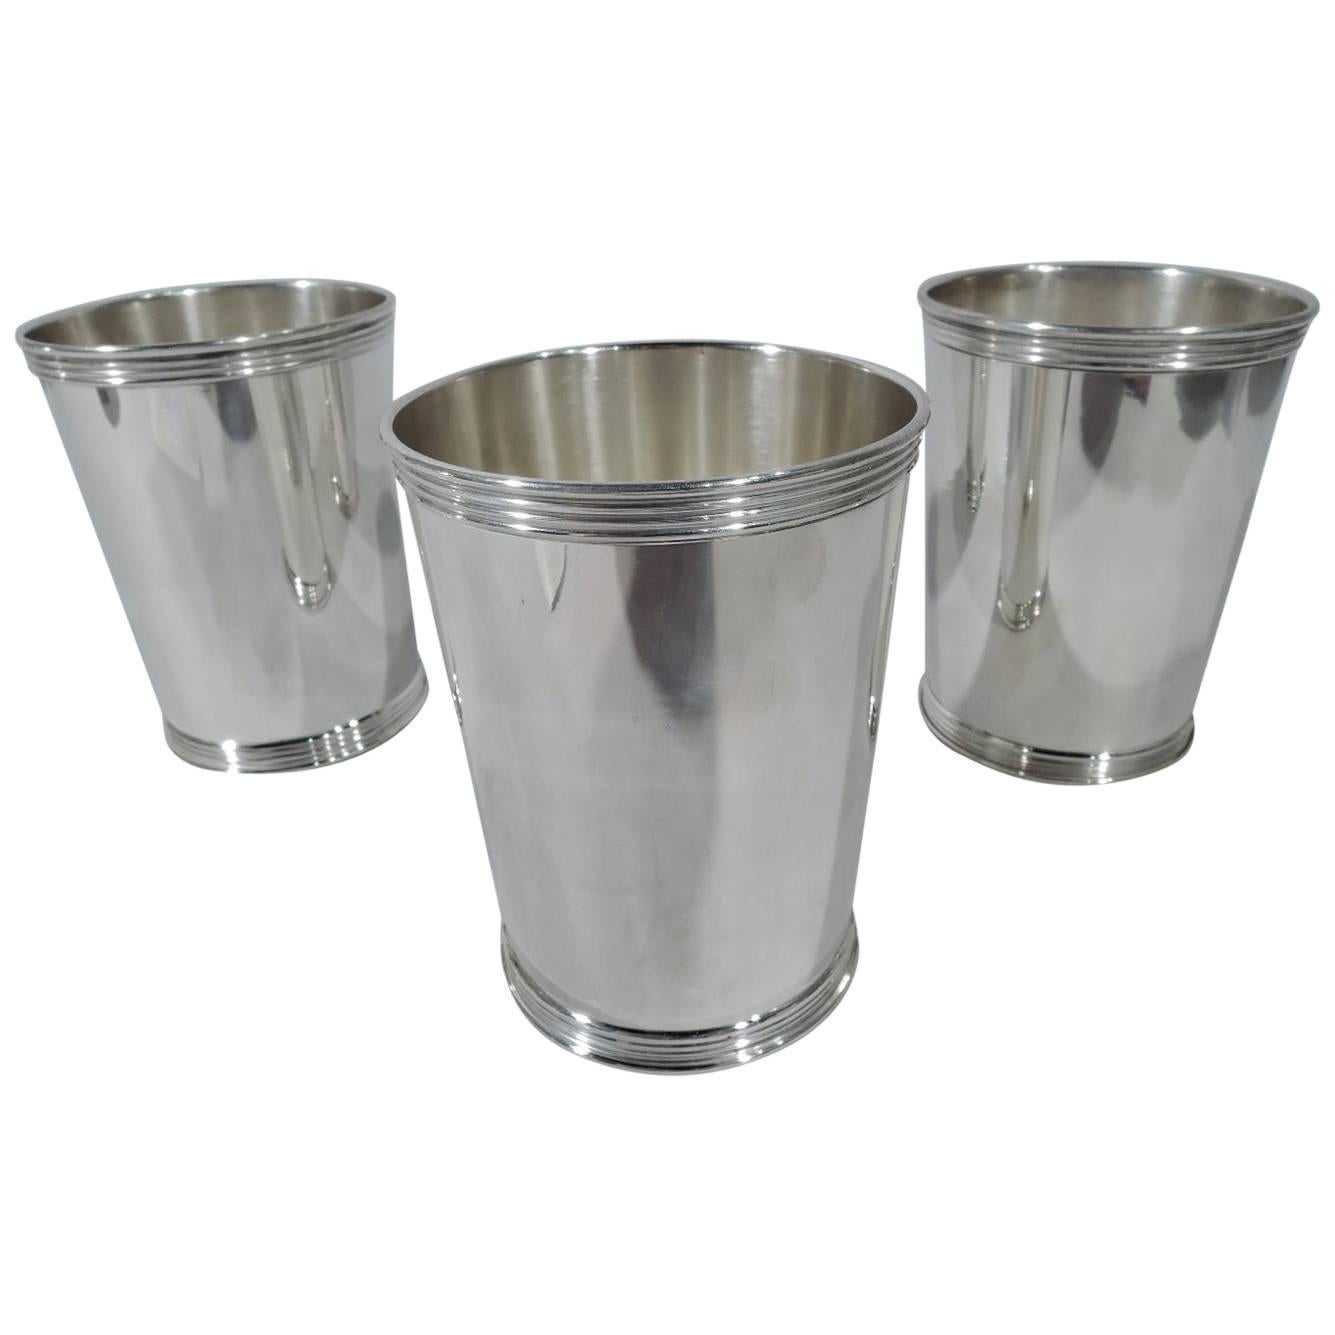 Set of Three American Midcentury Modern Sterling Silver Mint Julep Cups